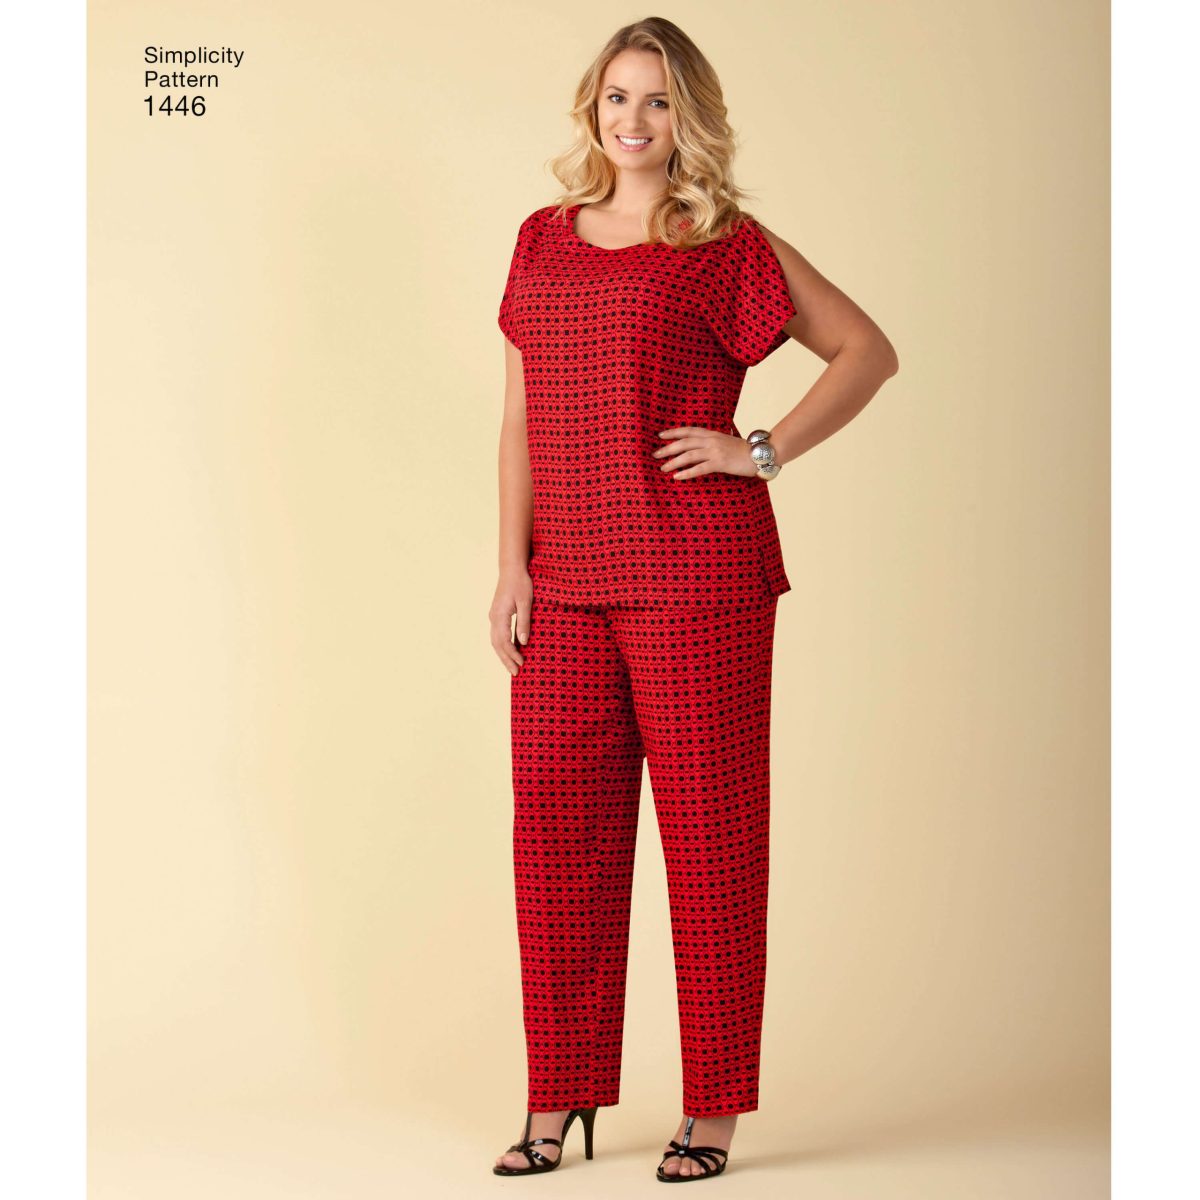 Simplicity Sewing Pattern 1446 Six Made Easy Pull on Tops and Trousers or Shorts for Plus Size